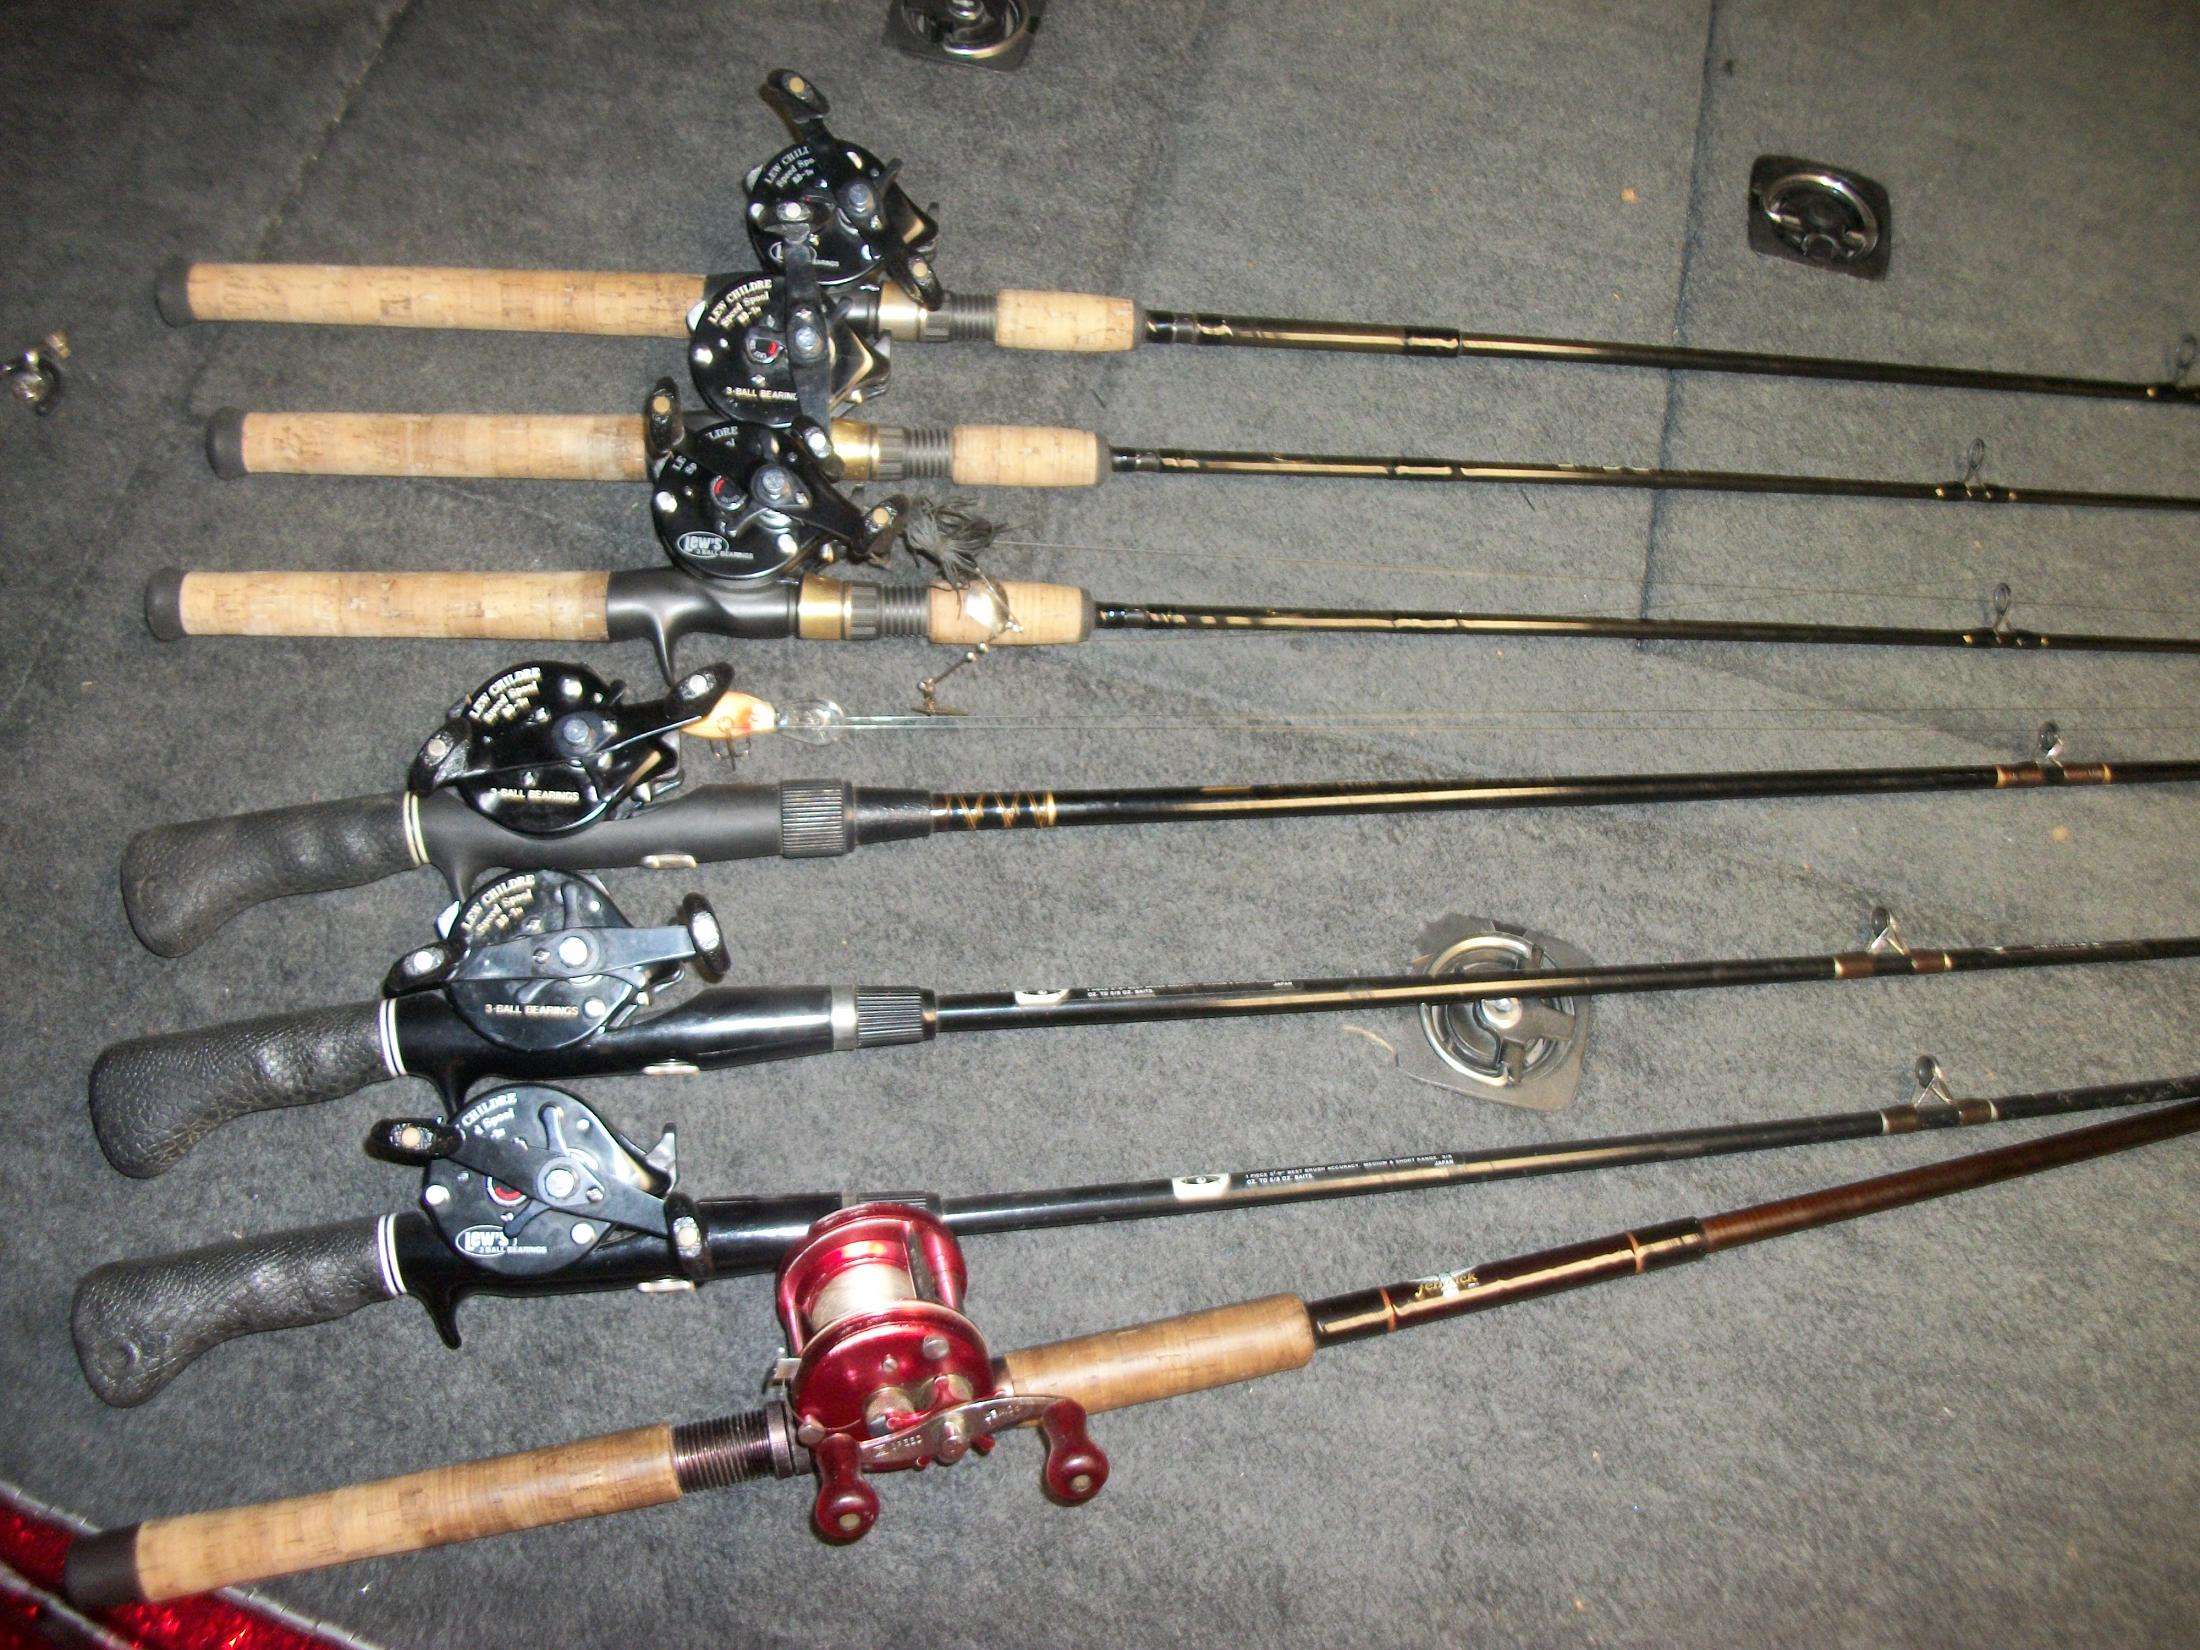 Got this Lew Childre reel. Need some knowledge! - Fishing Rods